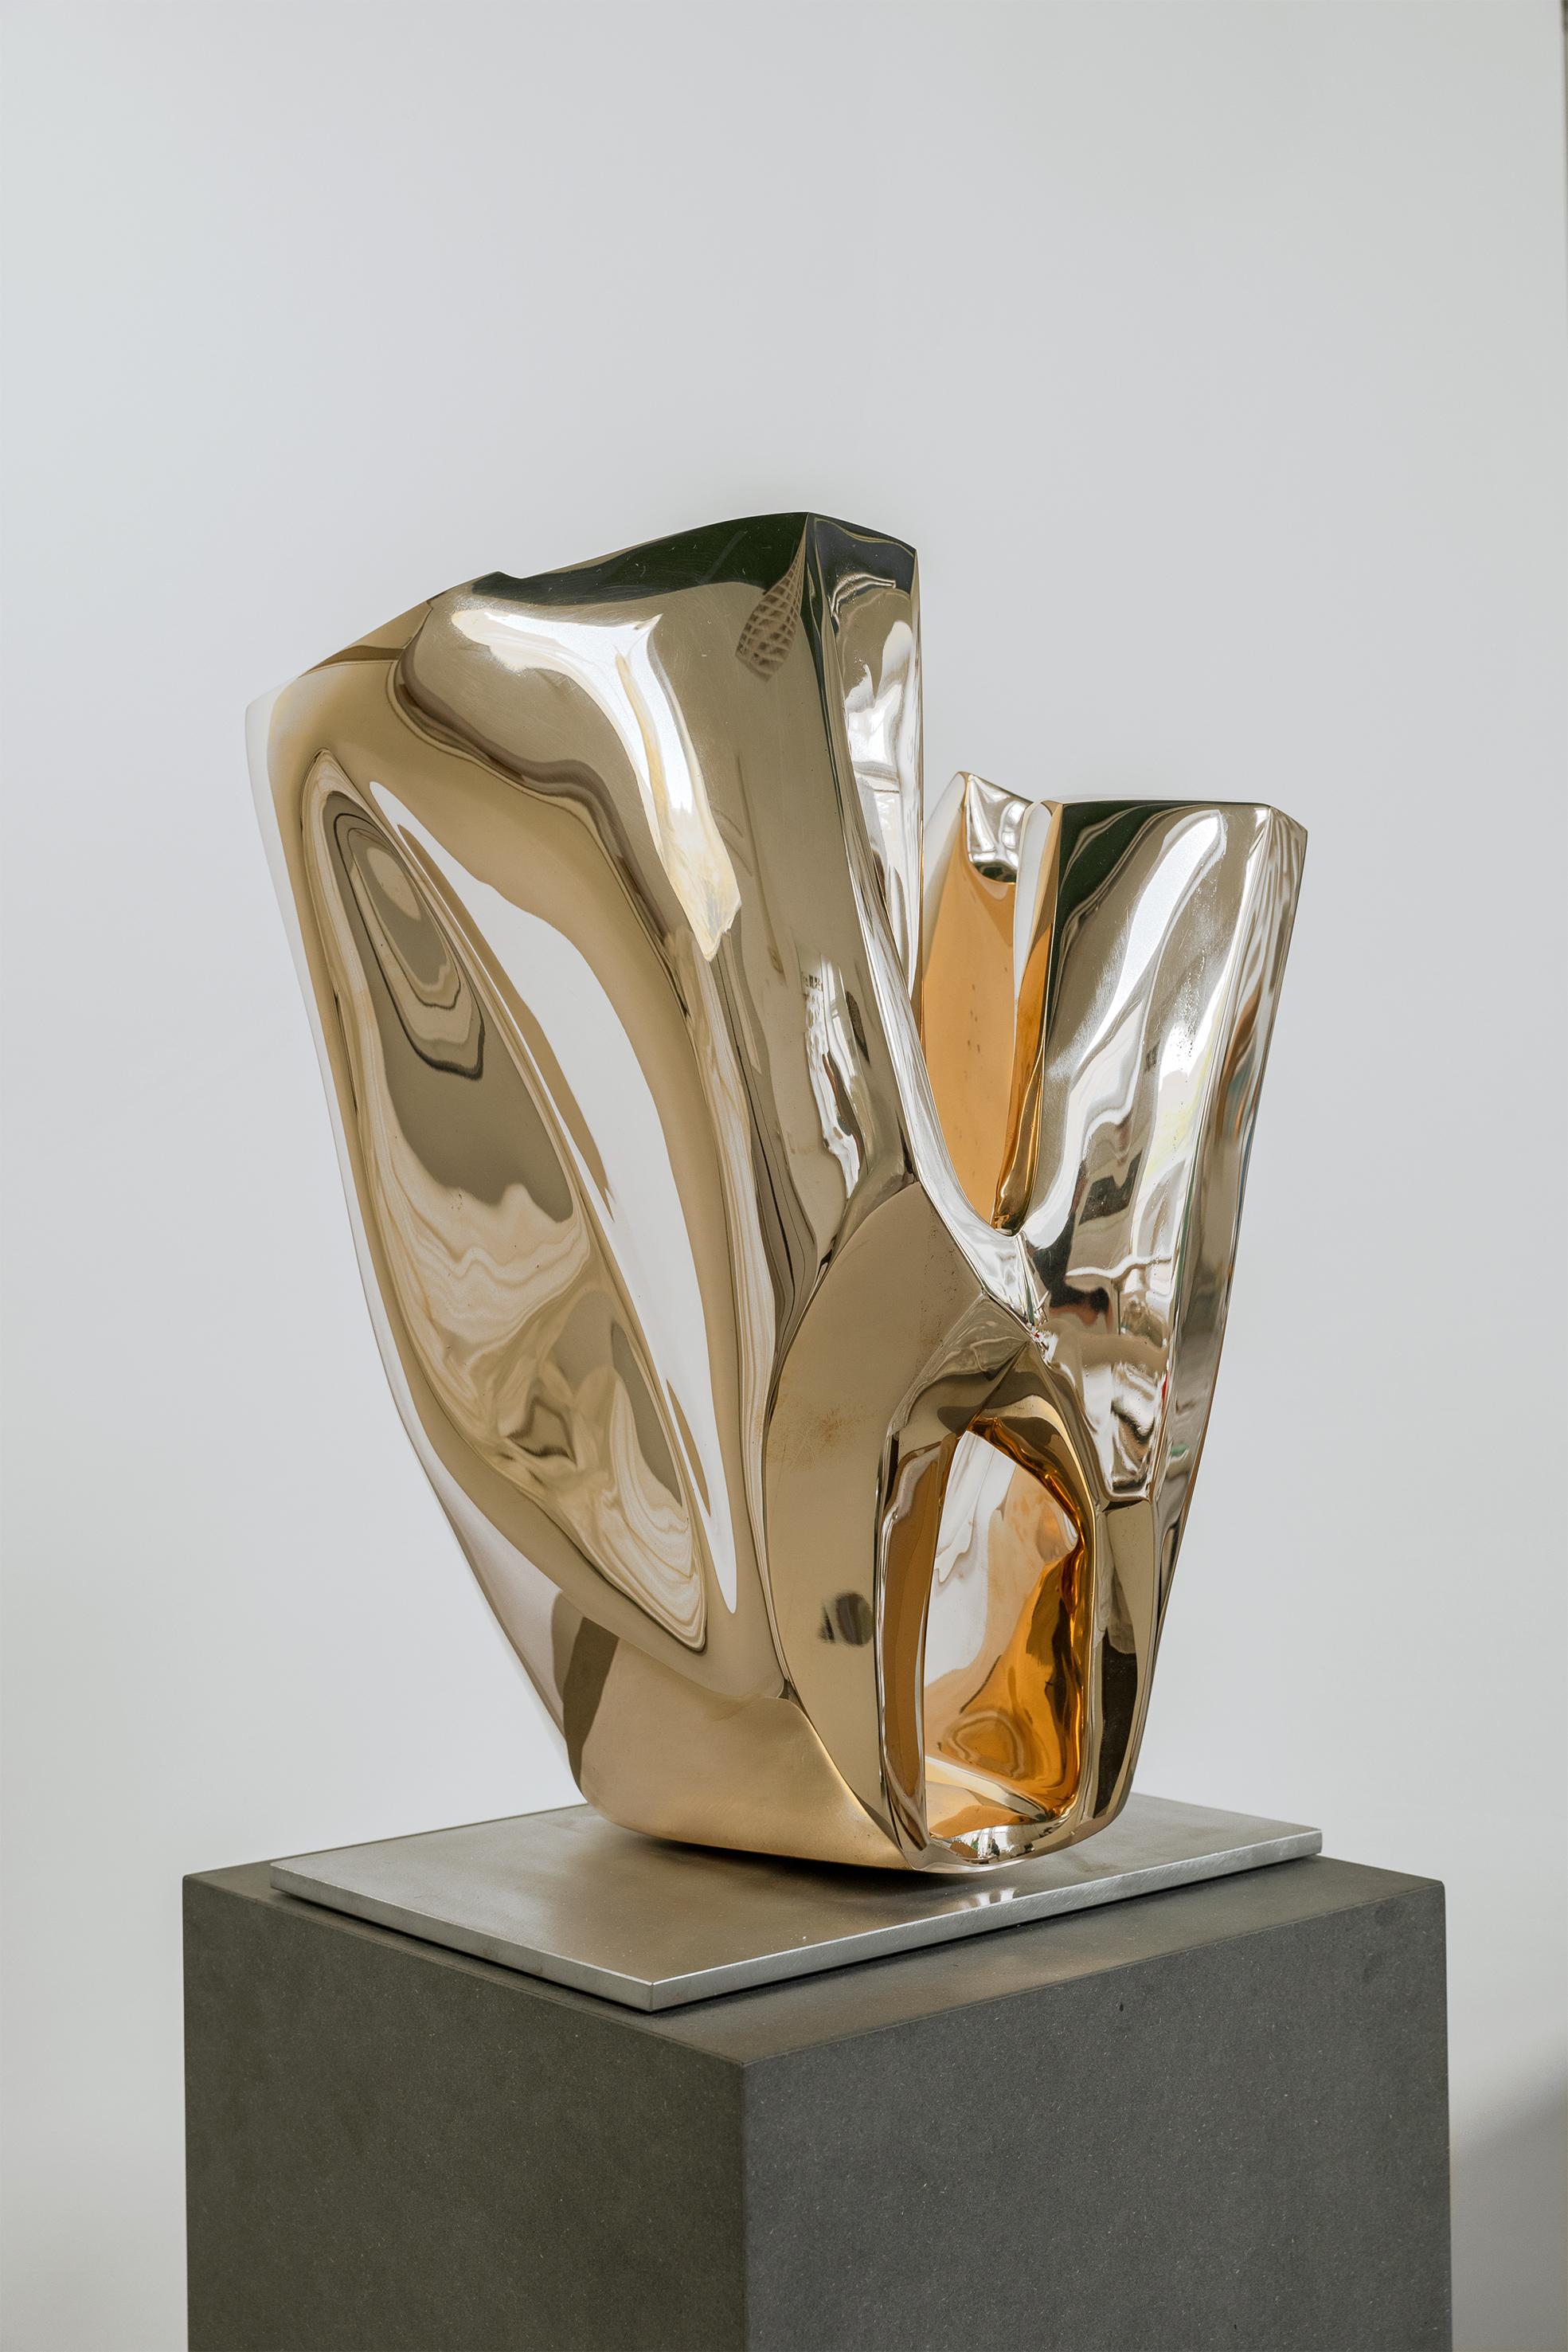 Bronze Sculpture 'PELA' by Carola Eggeling
Abstract sculpture with beautiful curved lines.

German bronze sculpture
Bronze Polished 
Certificate of authenticity
Numbered and signed artwork
Limited edition of 6
Measures: H. 55 x 33 x 44